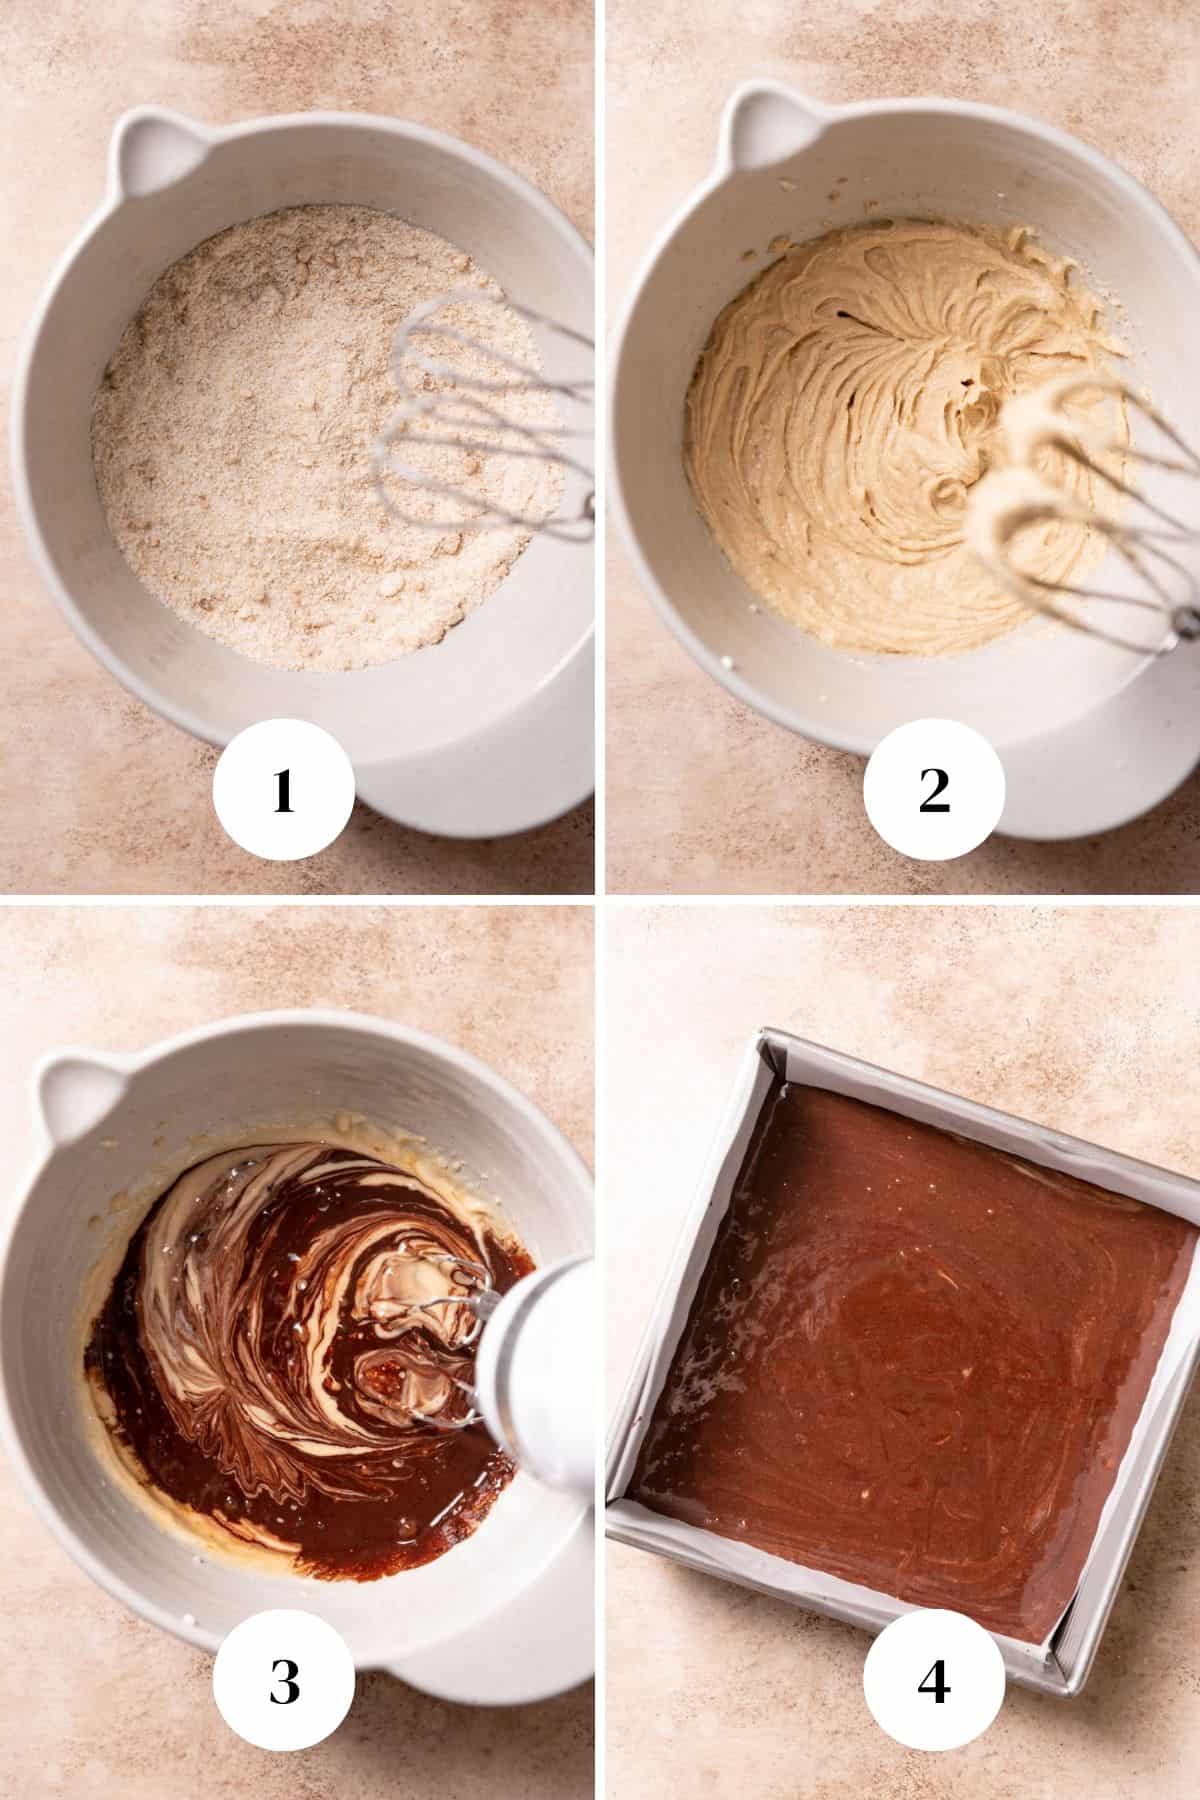 a process collage of the steps for making the chocolate cake batter.